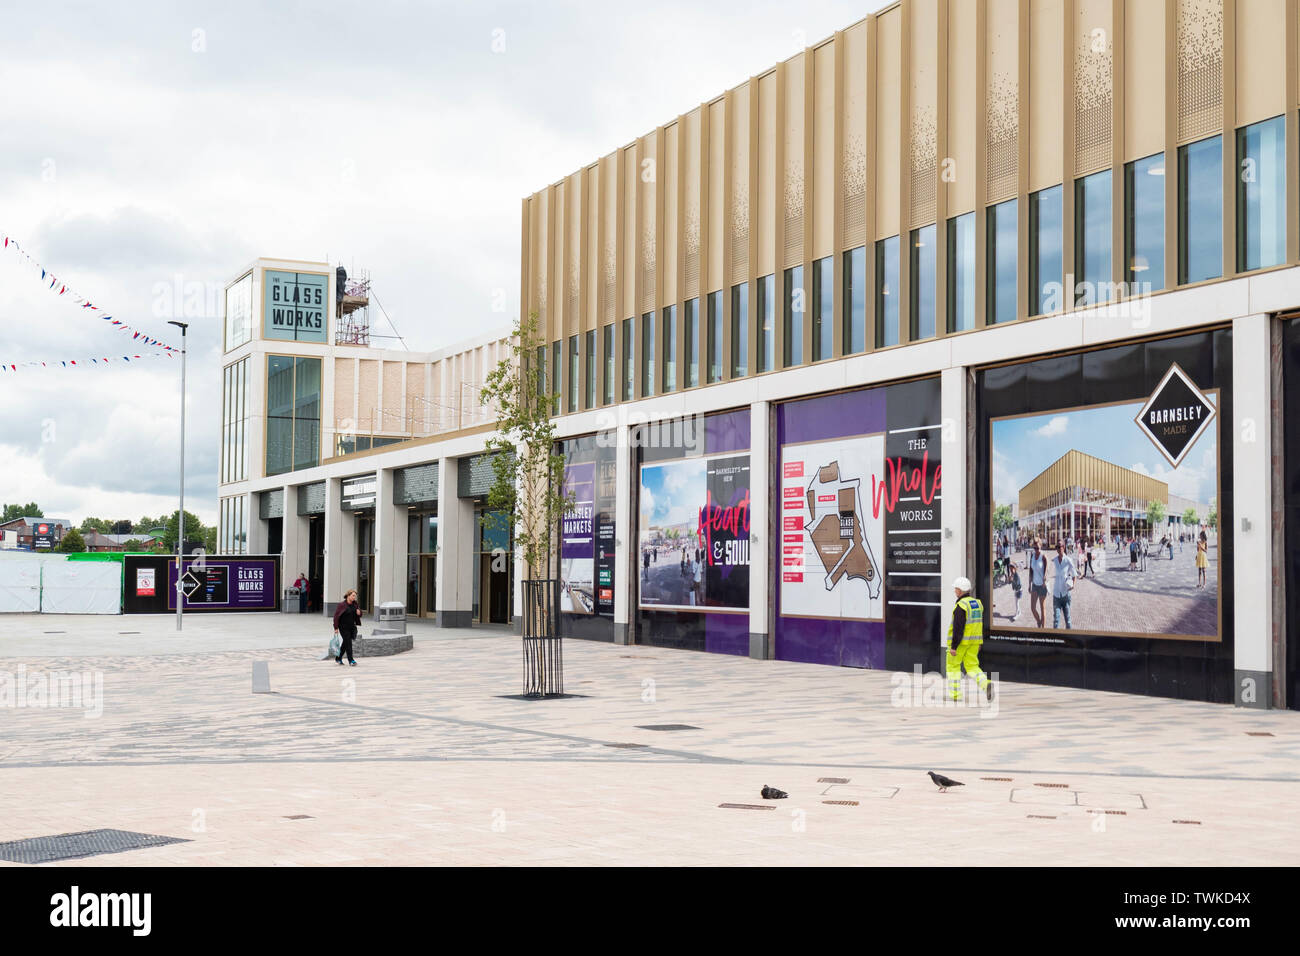 The Glass Works - town centre regeneration and retail development including Barnsley Markets - during construction 2019, Barnsley, South Yorkshire, UK Stock Photo